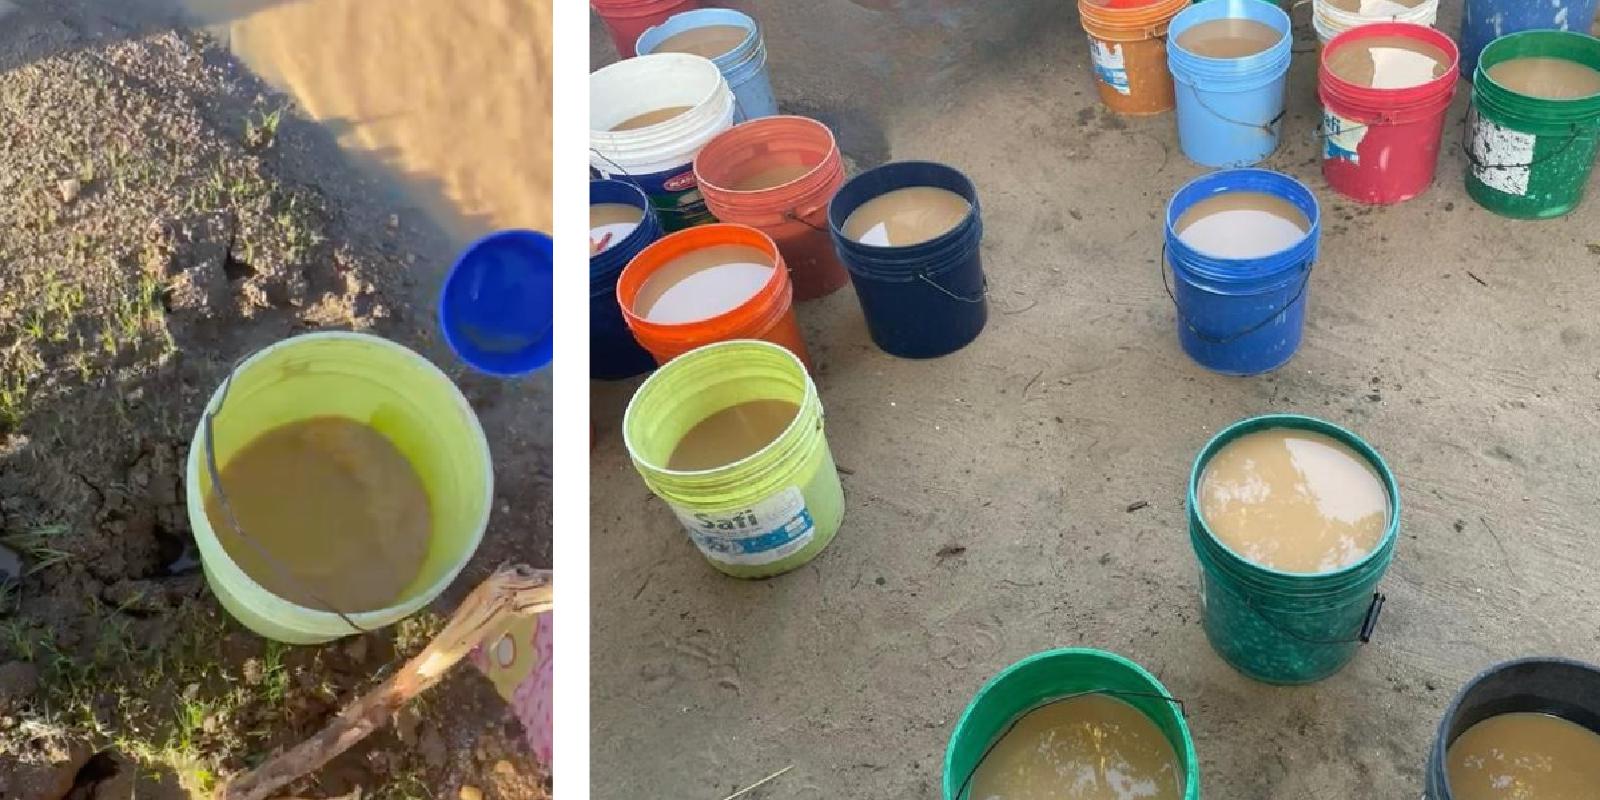 Women would fill these buckets with murky water from rivers and ponds and carry them to the village